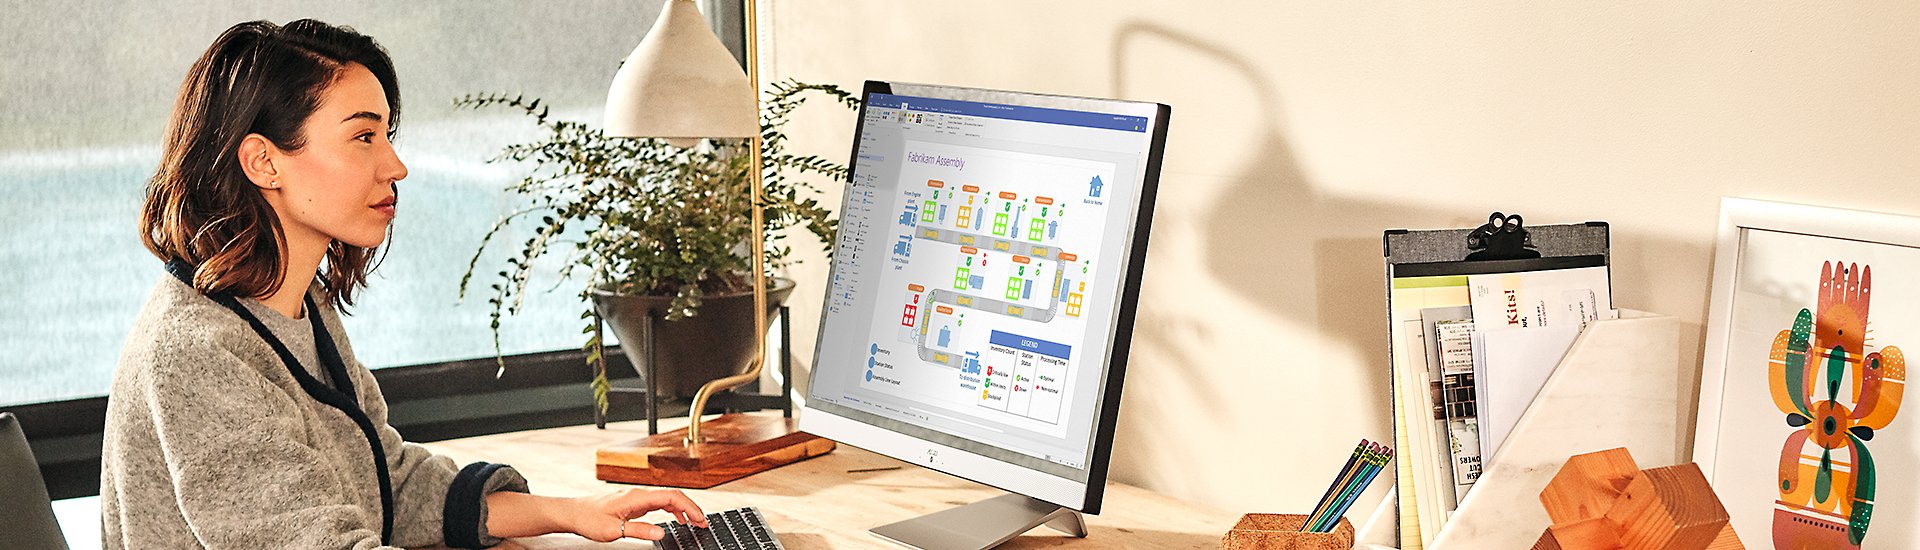 A person looking at a file in Visio on a large desktop monitor